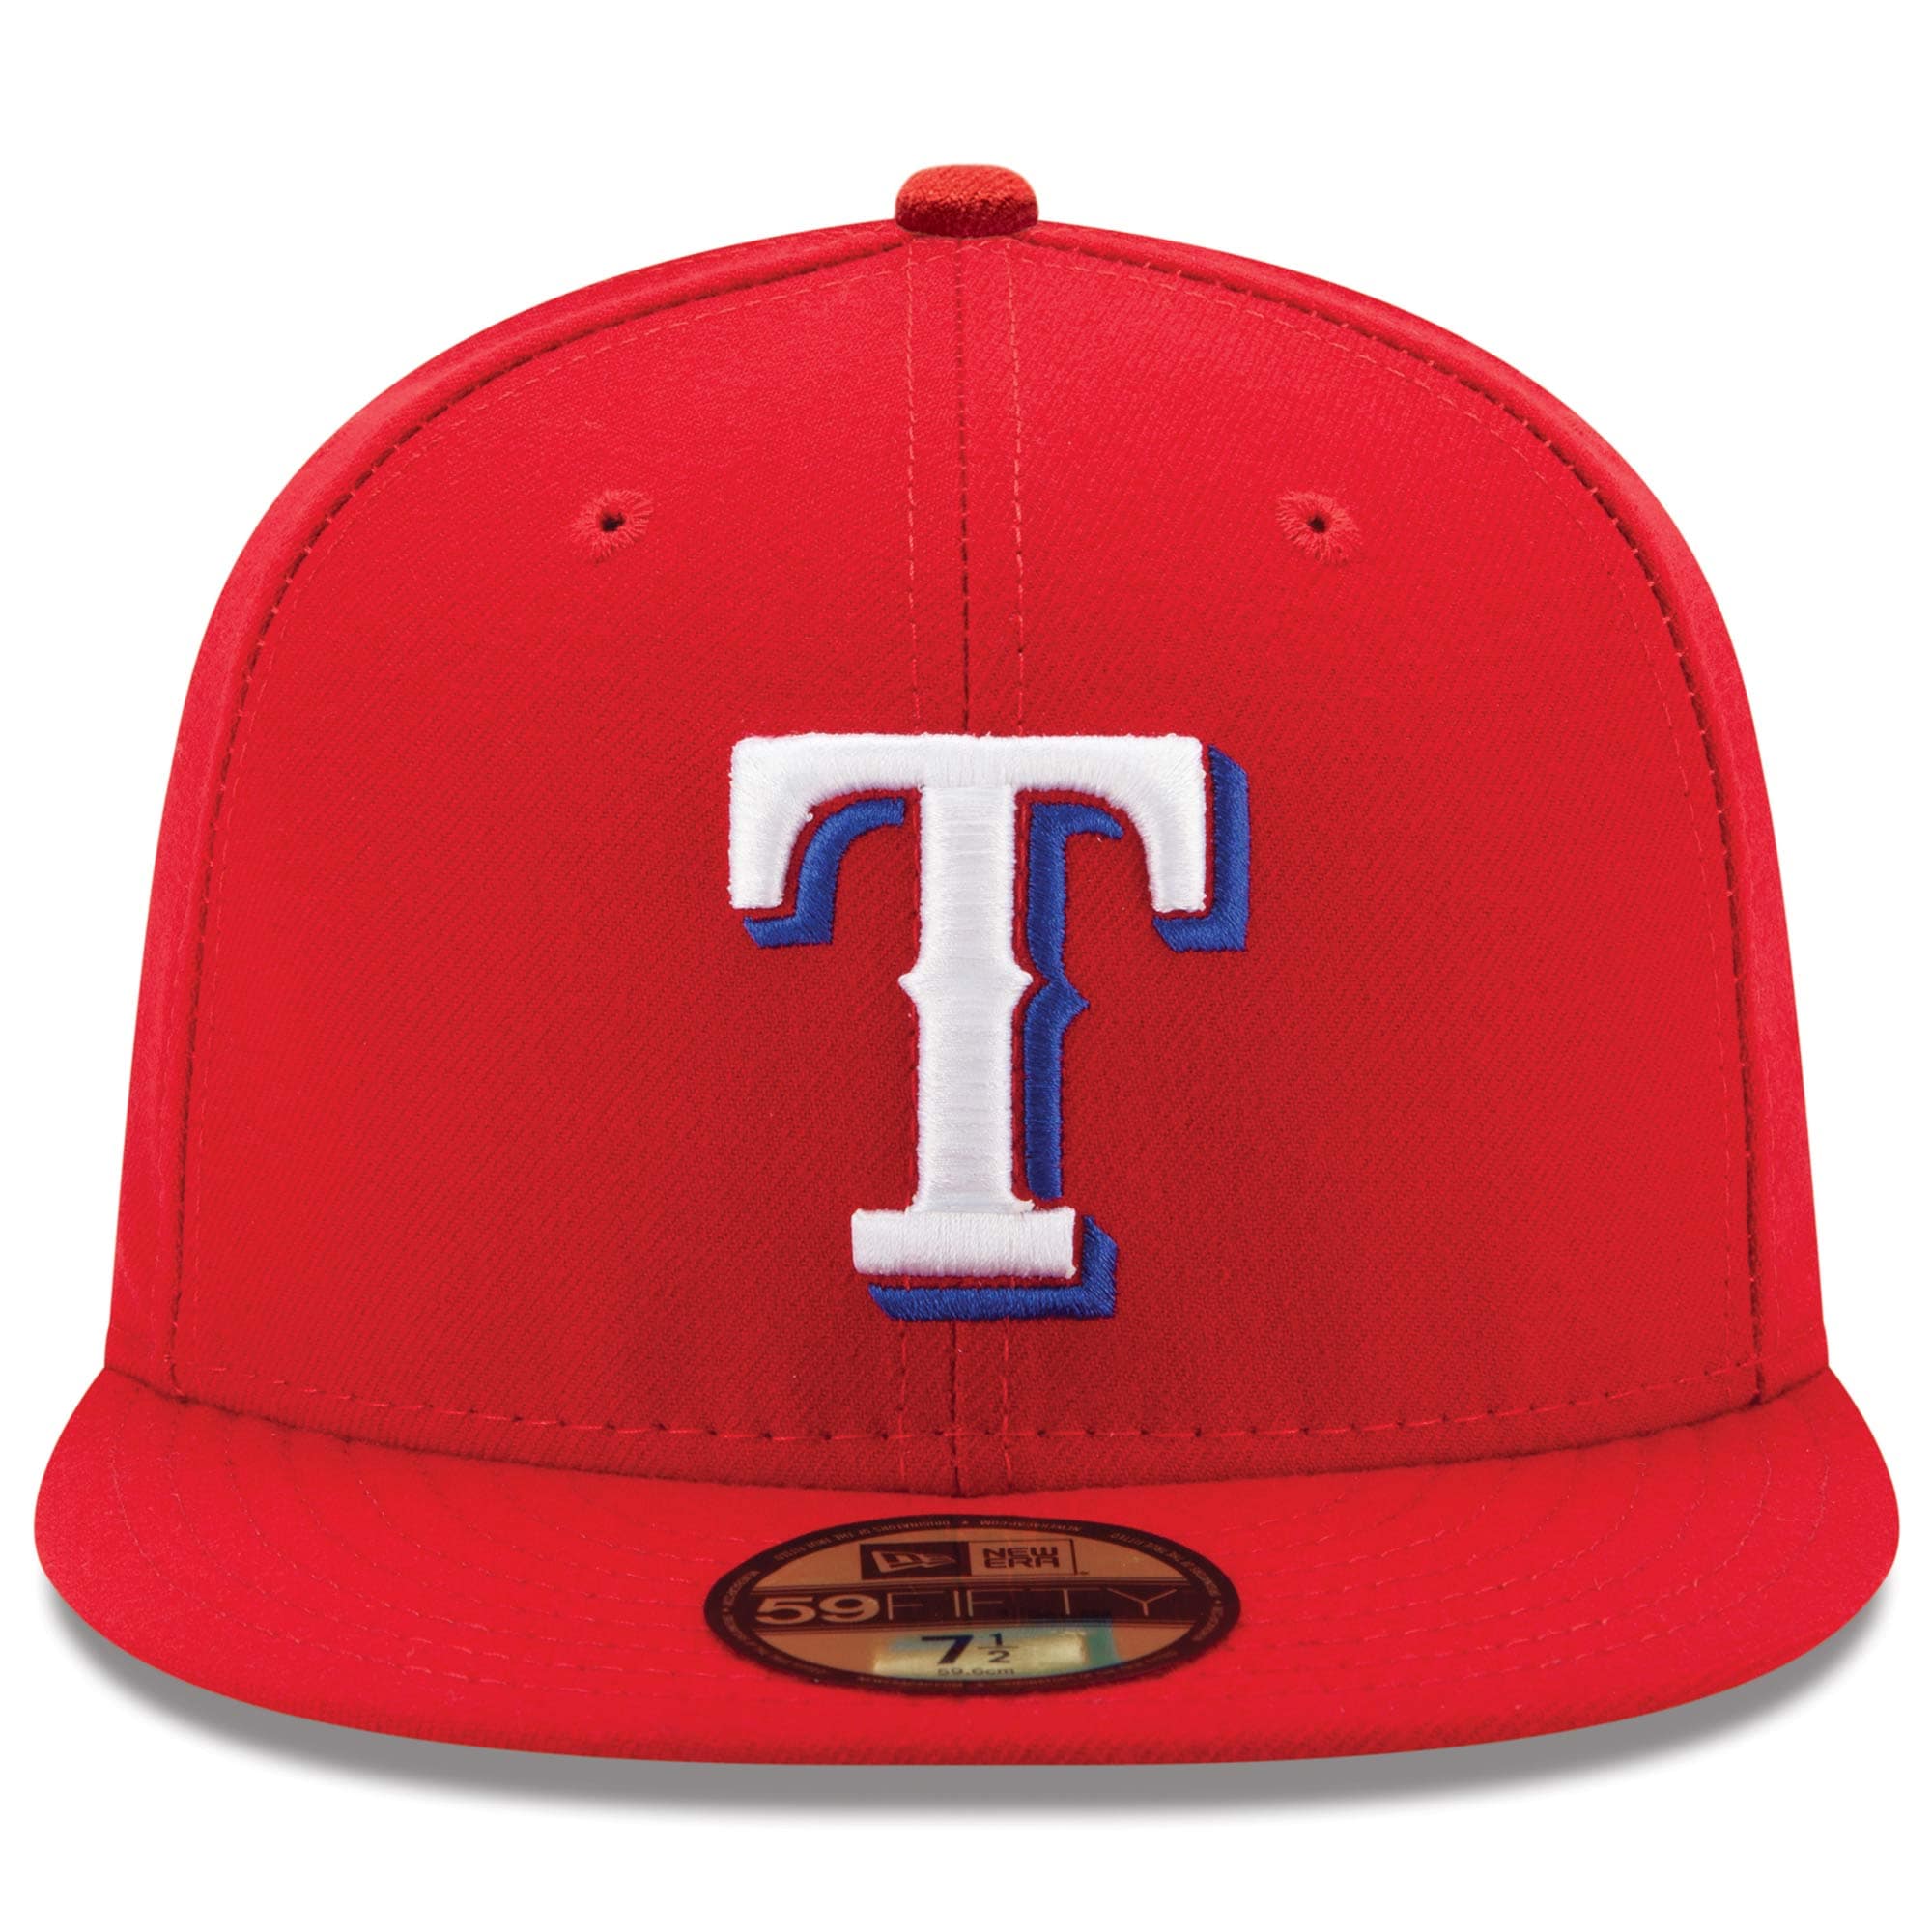 Men's New Era Red Texas Rangers Alternate Authentic Collection On-Field 59FIFTY Fitted Hat - image 2 of 4